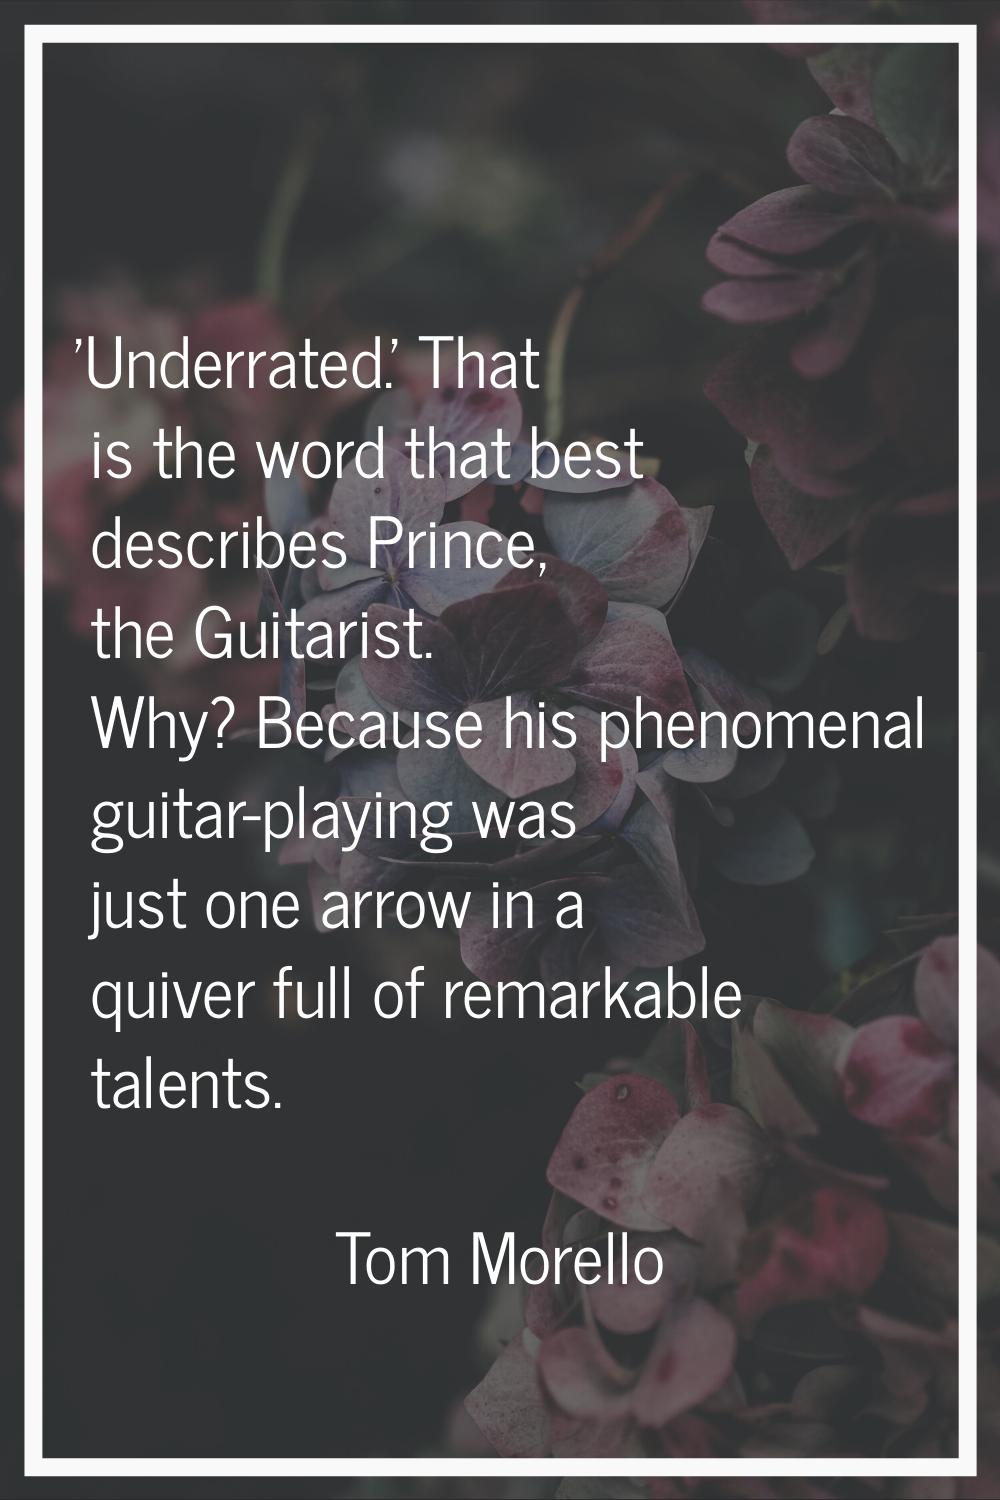 'Underrated.' That is the word that best describes Prince, the Guitarist. Why? Because his phenomen